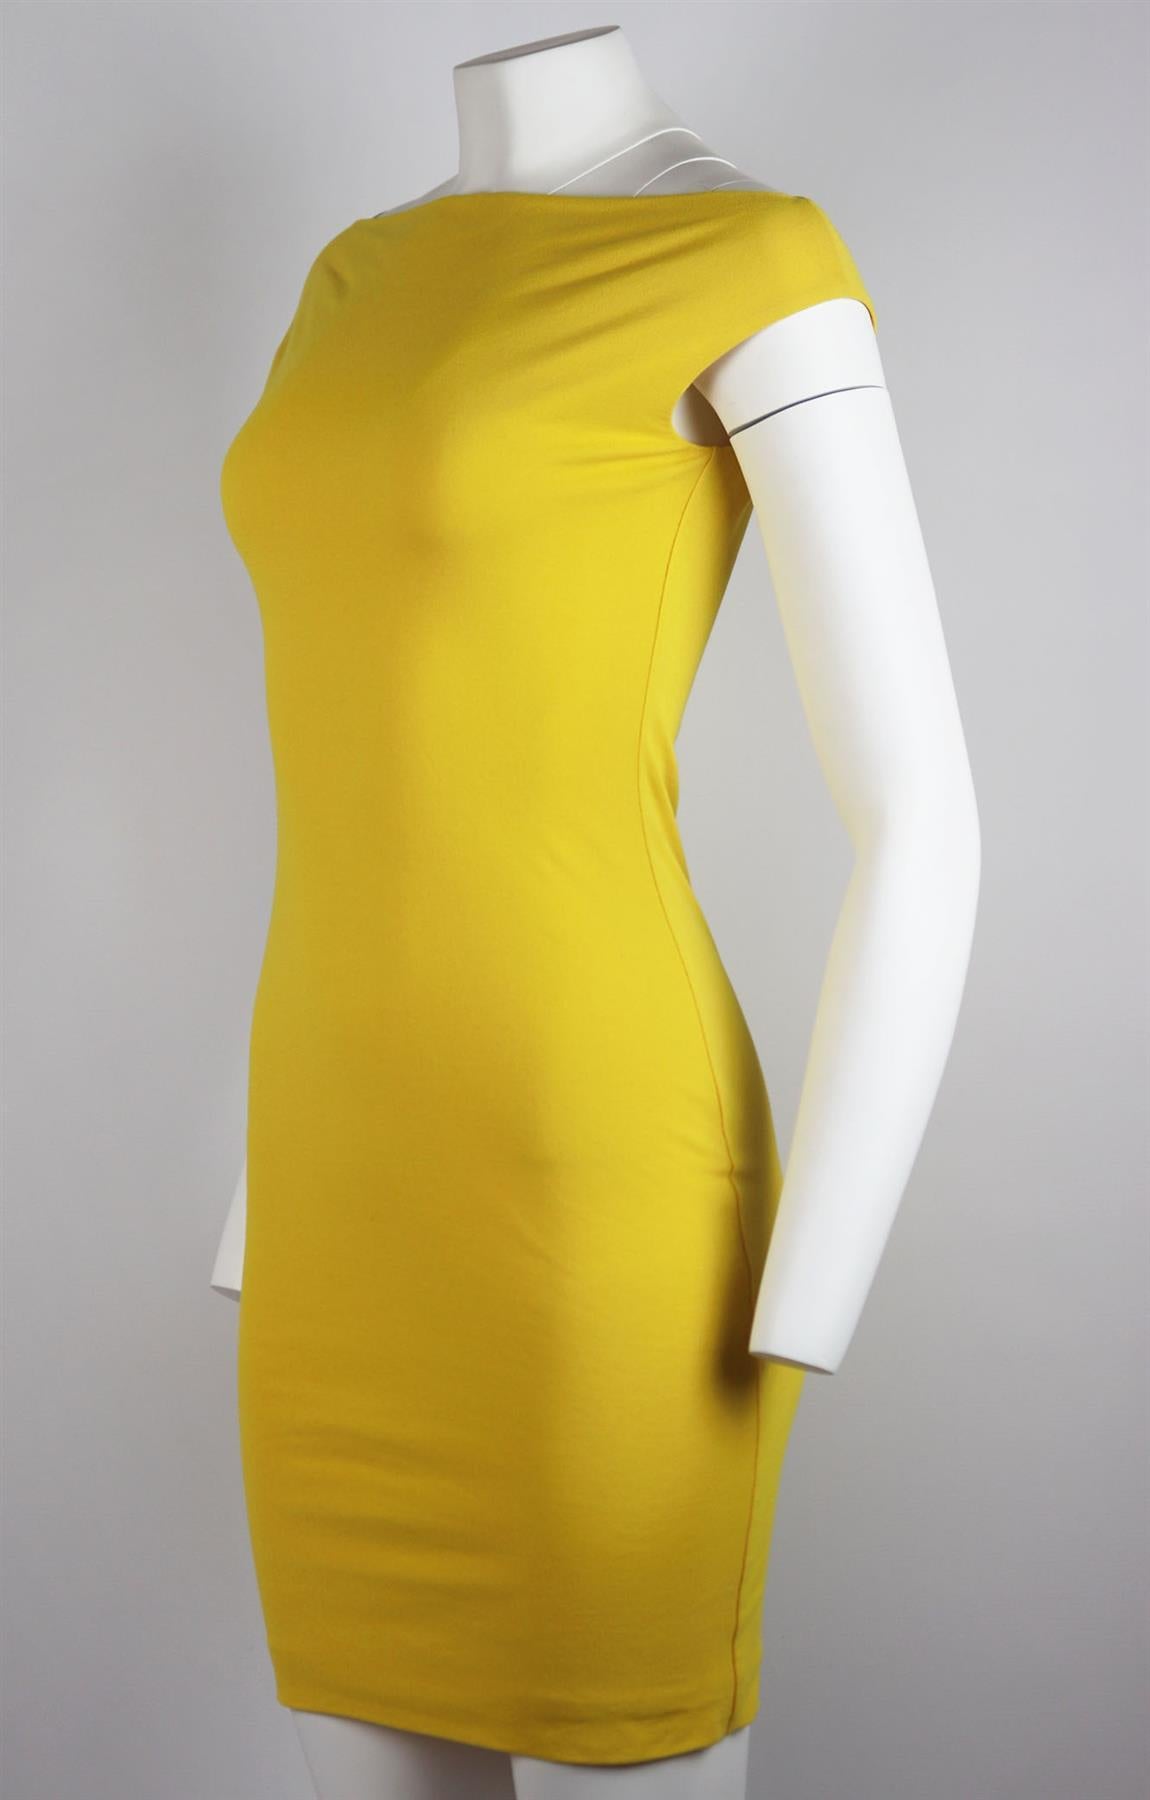 DSquared2's softly draped mini dress is cut for a close fit from yellow cotton-jersey that falls gently over your silhouette. Yellow cotton-jersey. Slips on. 100% Cotton. Size: Small (FR 36, UK 8, US 4, IT 40). Bust measures approx. 30.6 inches.